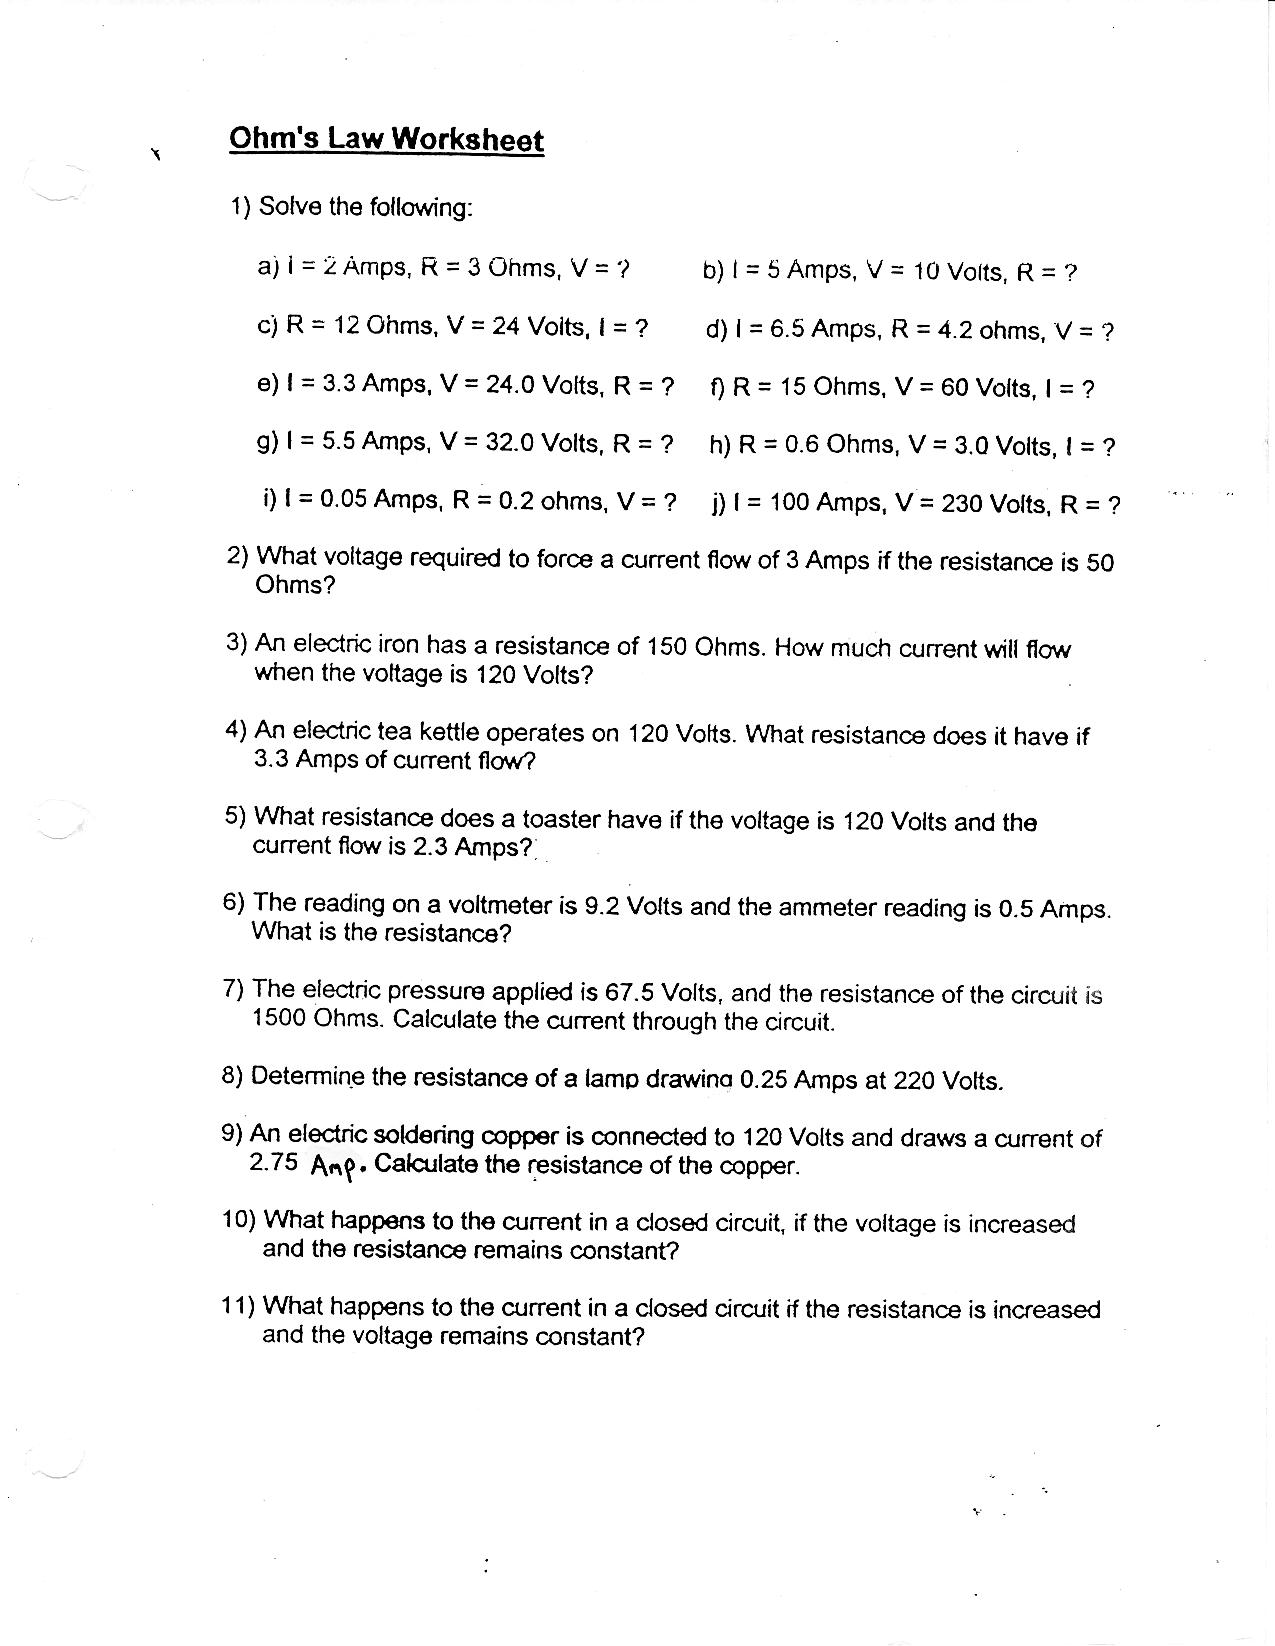 15-best-images-of-printable-chapter-summary-worksheets-ohms-law-worksheet-answers-book